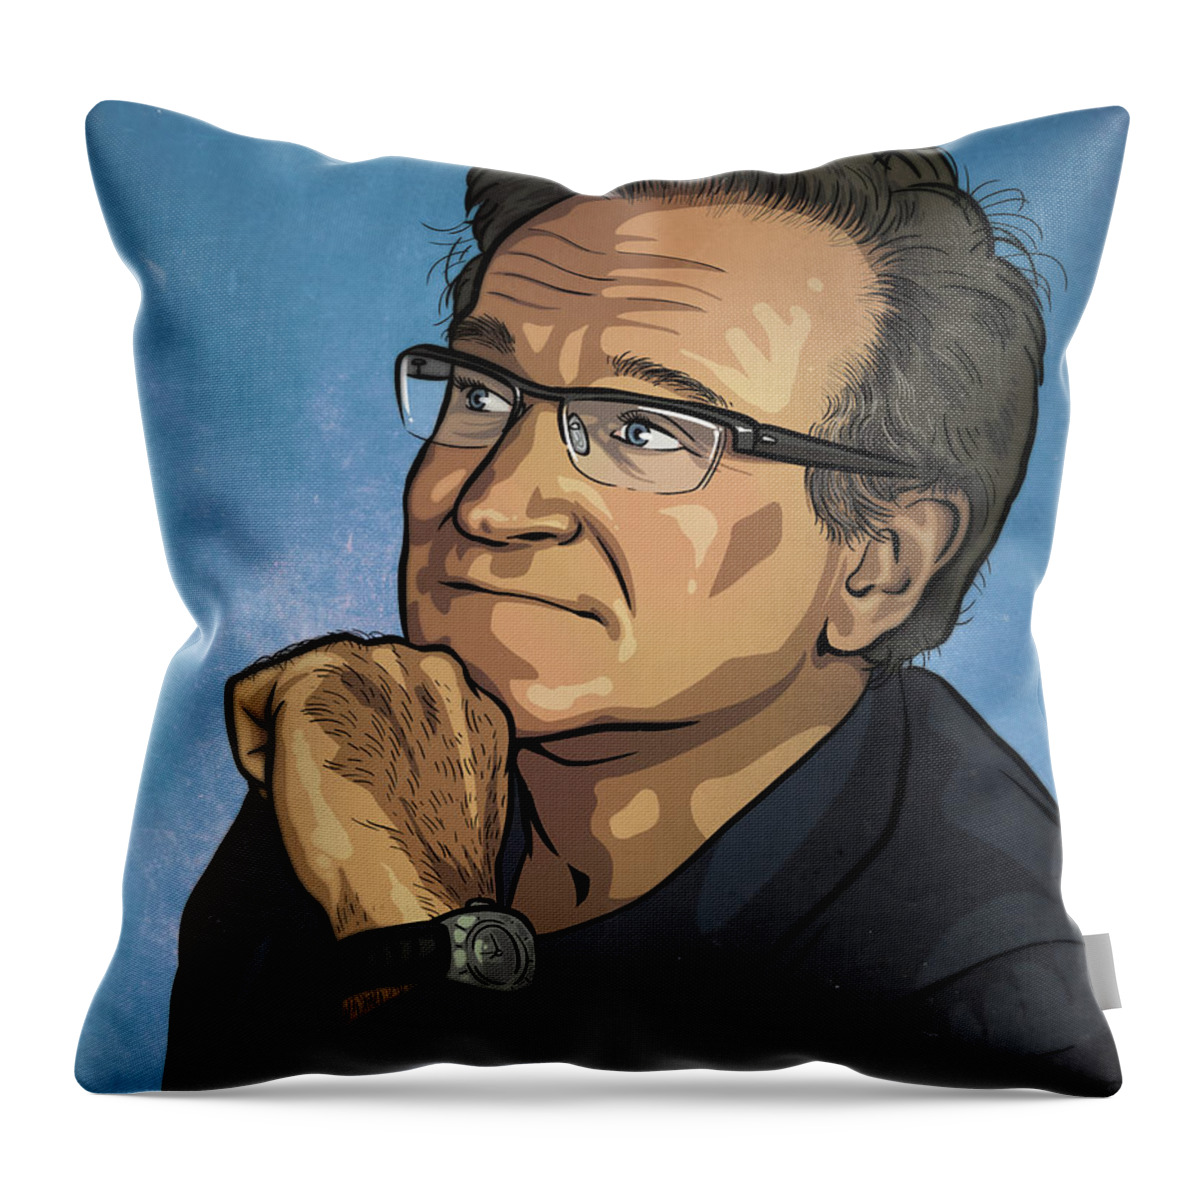 Robin Williams Throw Pillow featuring the drawing Robin Williams by Miggs The Artist